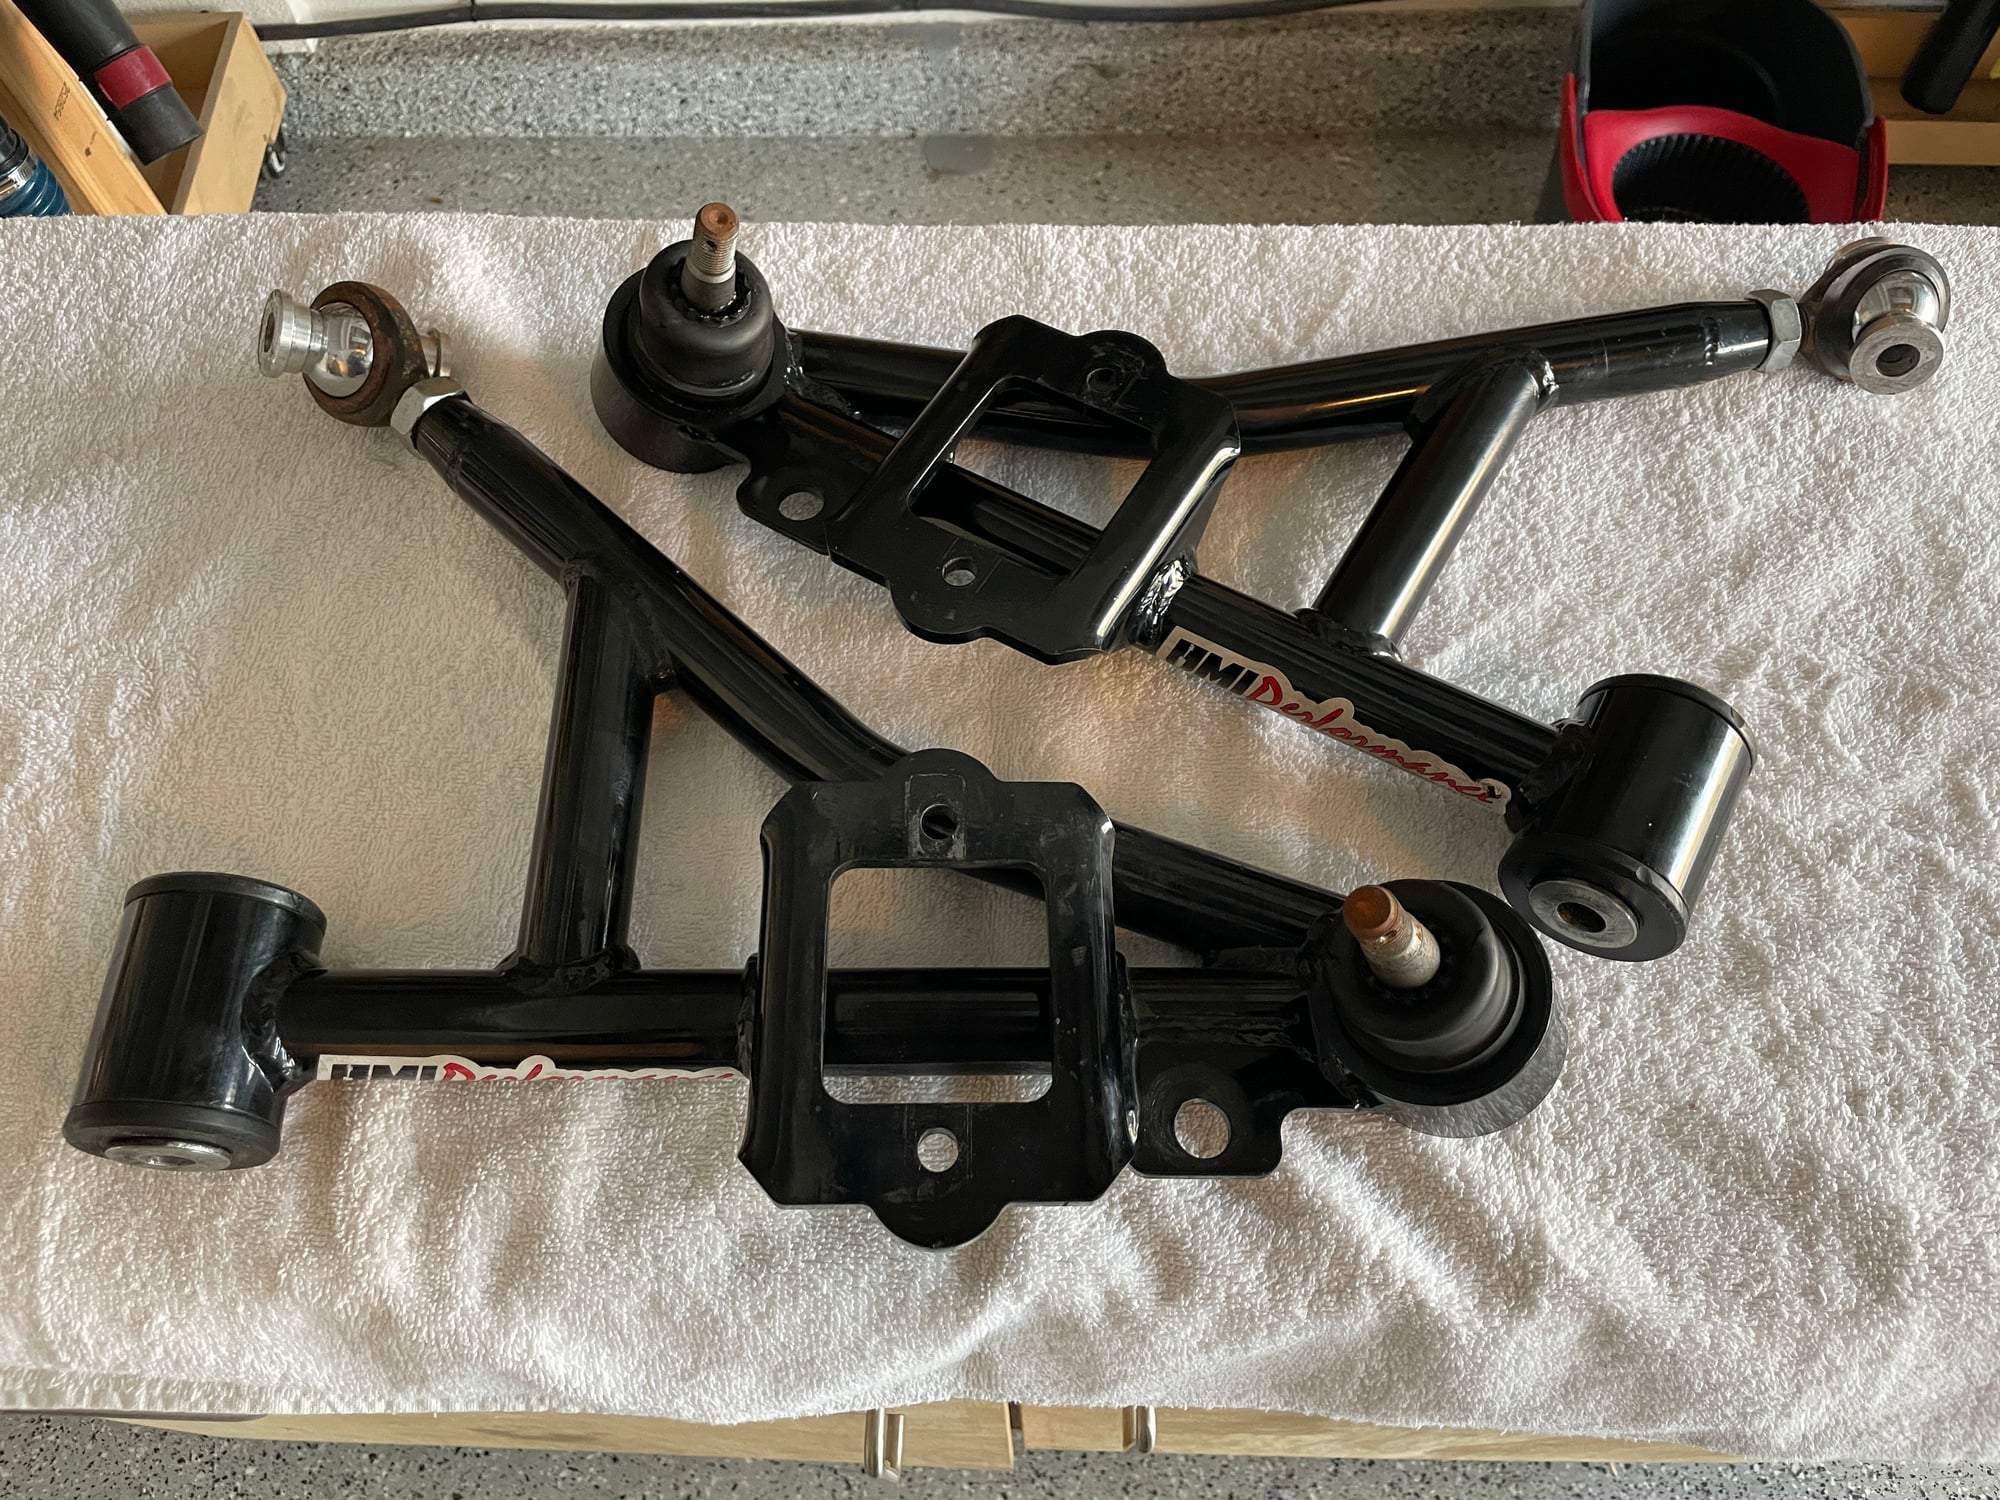 1995 Pontiac Firebird - UMI Performance Front and Lower A-Arm Kit - Steering/Suspension - $700 - Irvine, CA 92618, United States